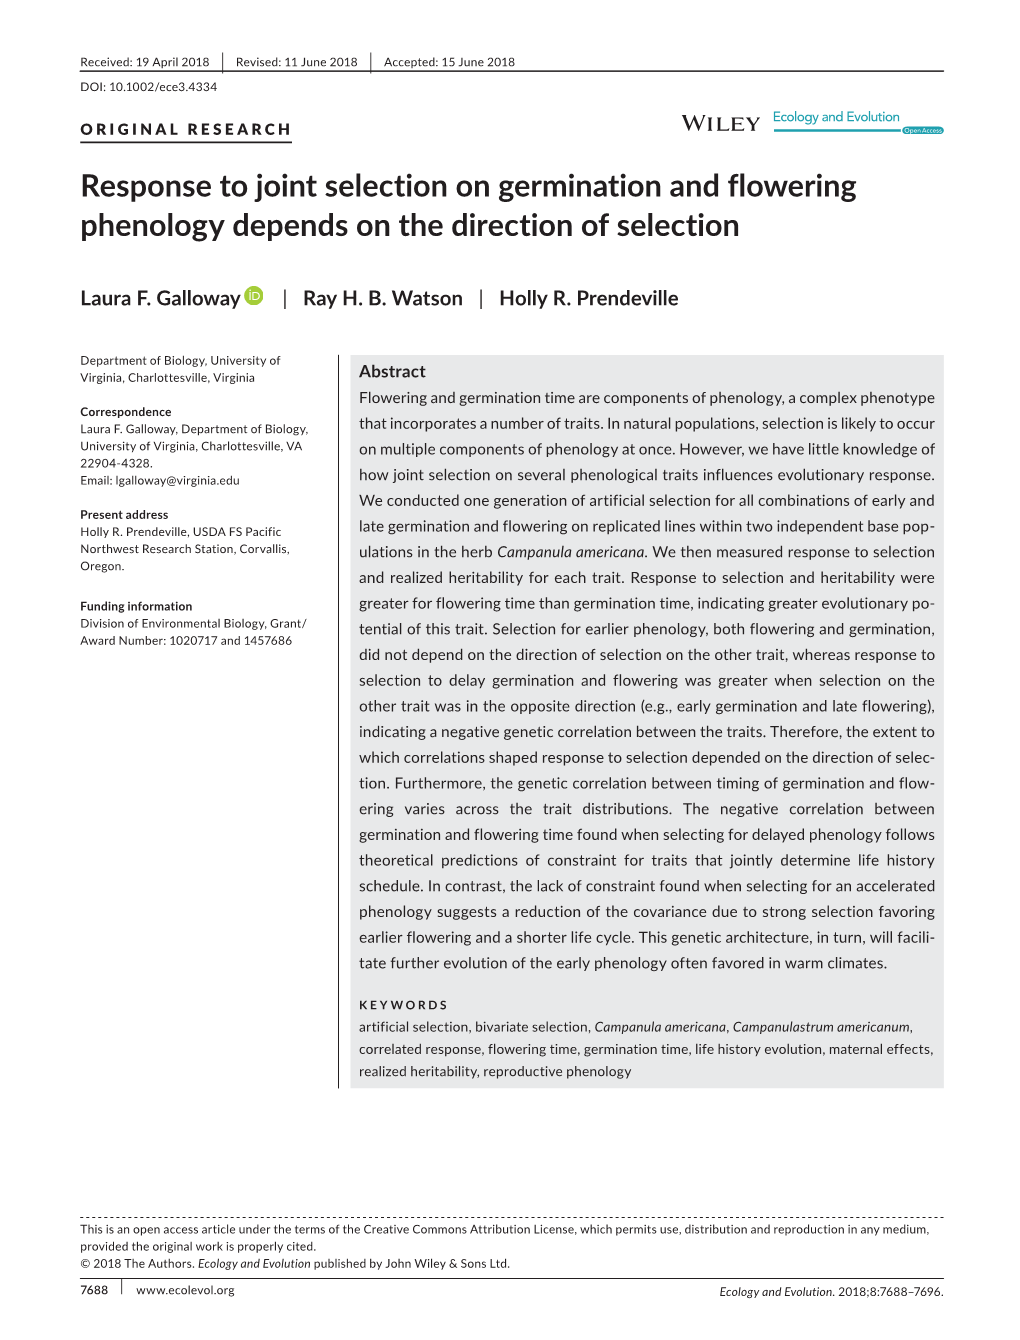 Response to Joint Selection on Germination and Flowering Phenology Depends on the Direction of Selection